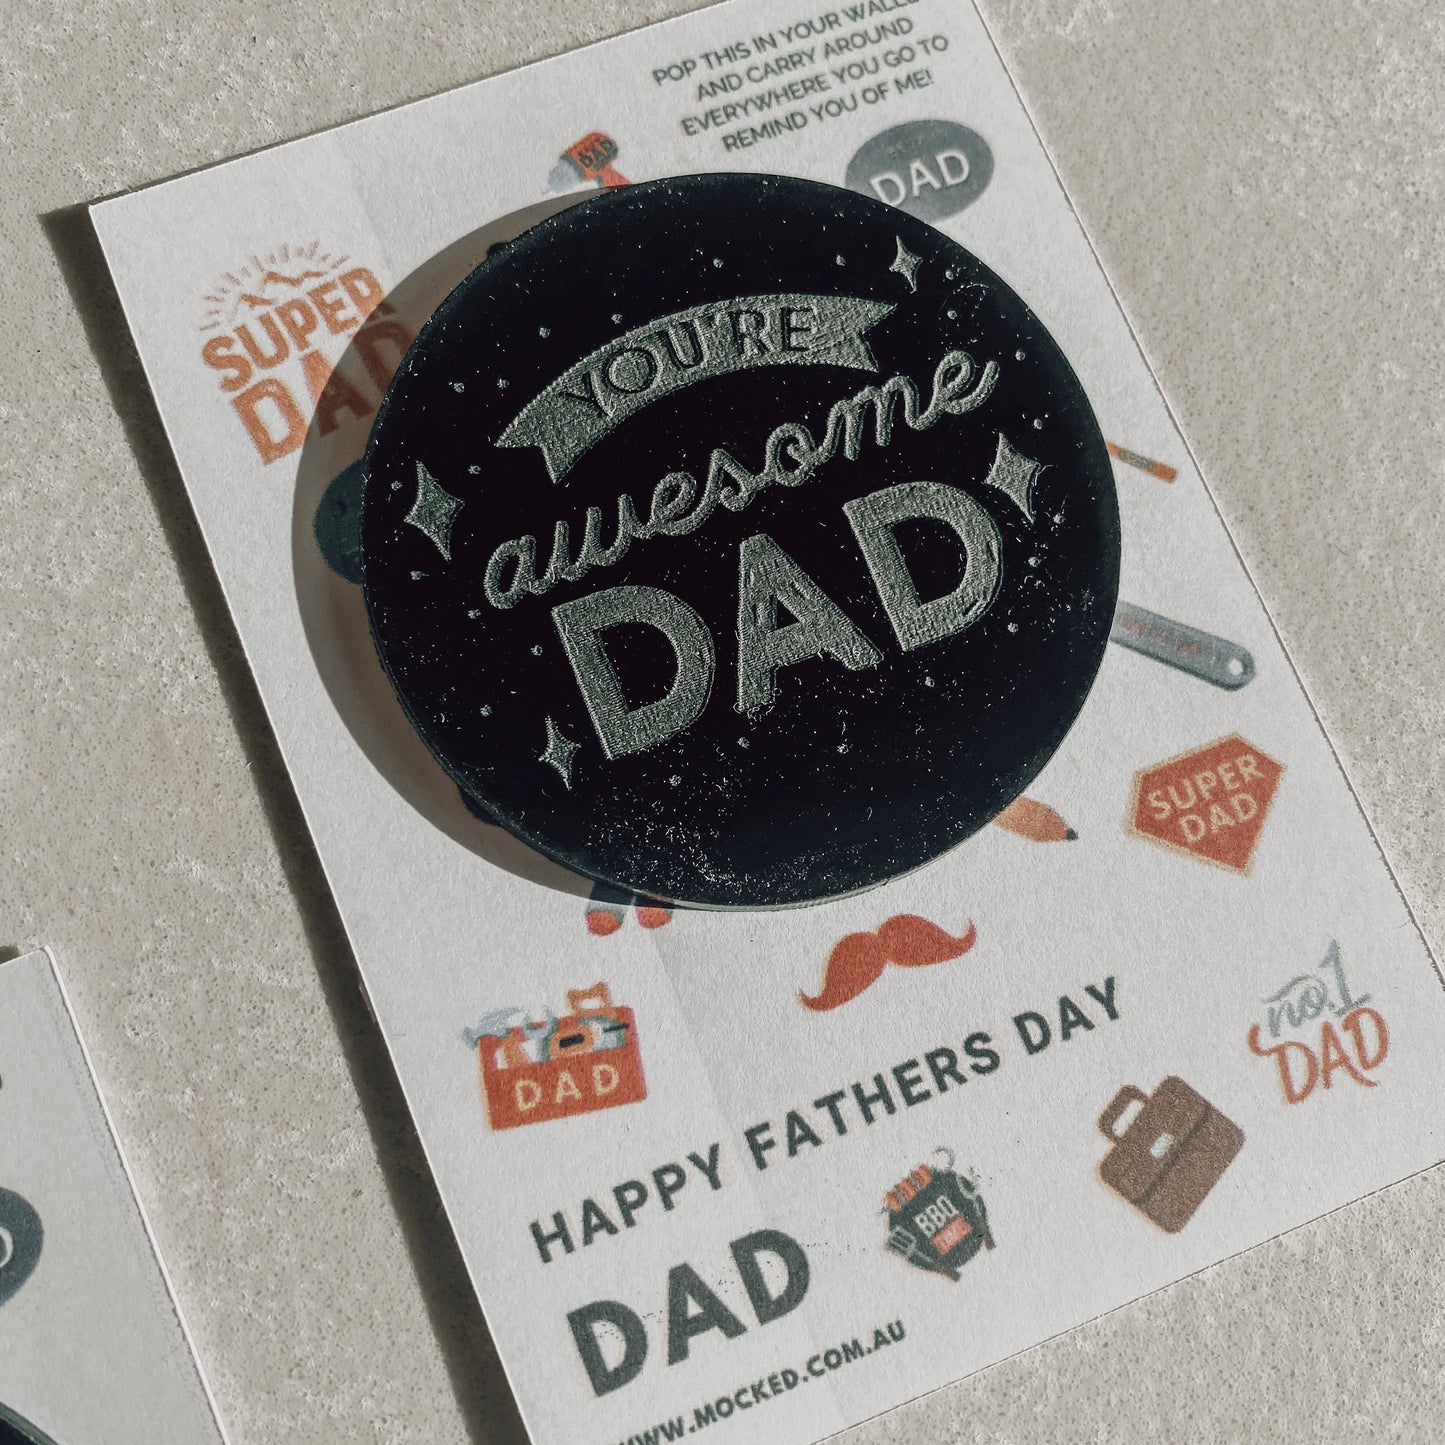 The Father’s Day Card